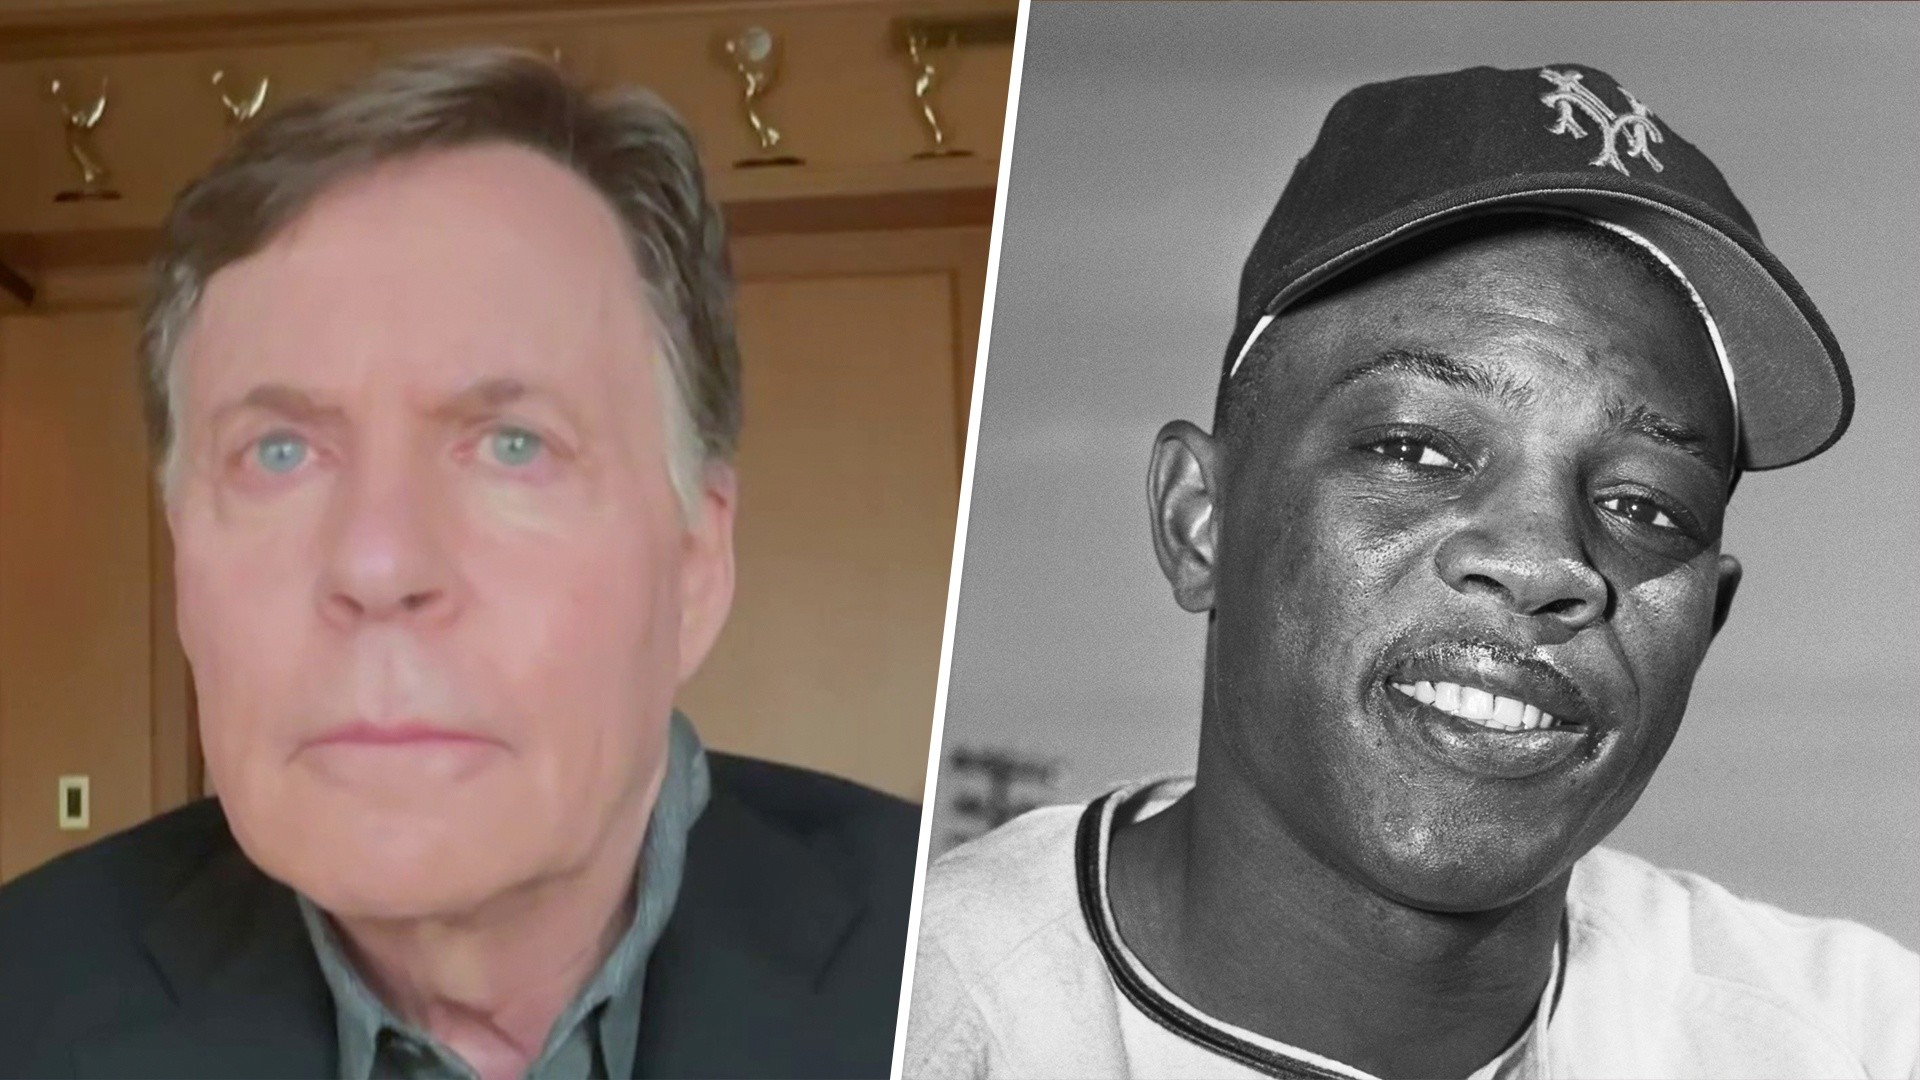 Bob Costas remembers legacy of baseball legend Willie Mays